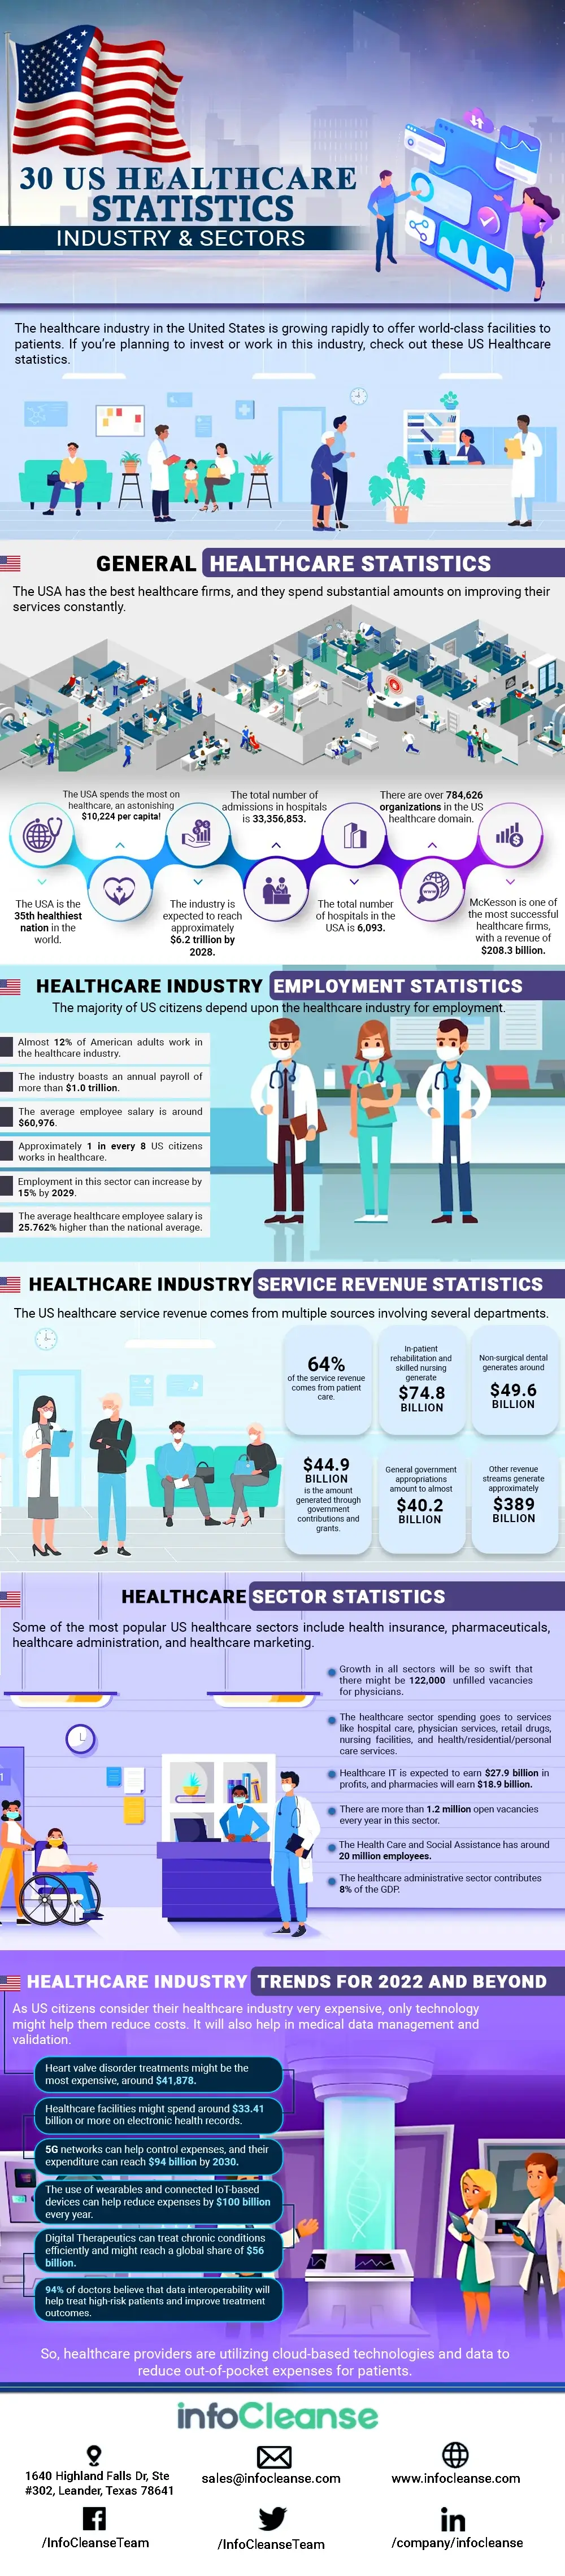 30 US Healthcare Statistics - Industry and Sectors